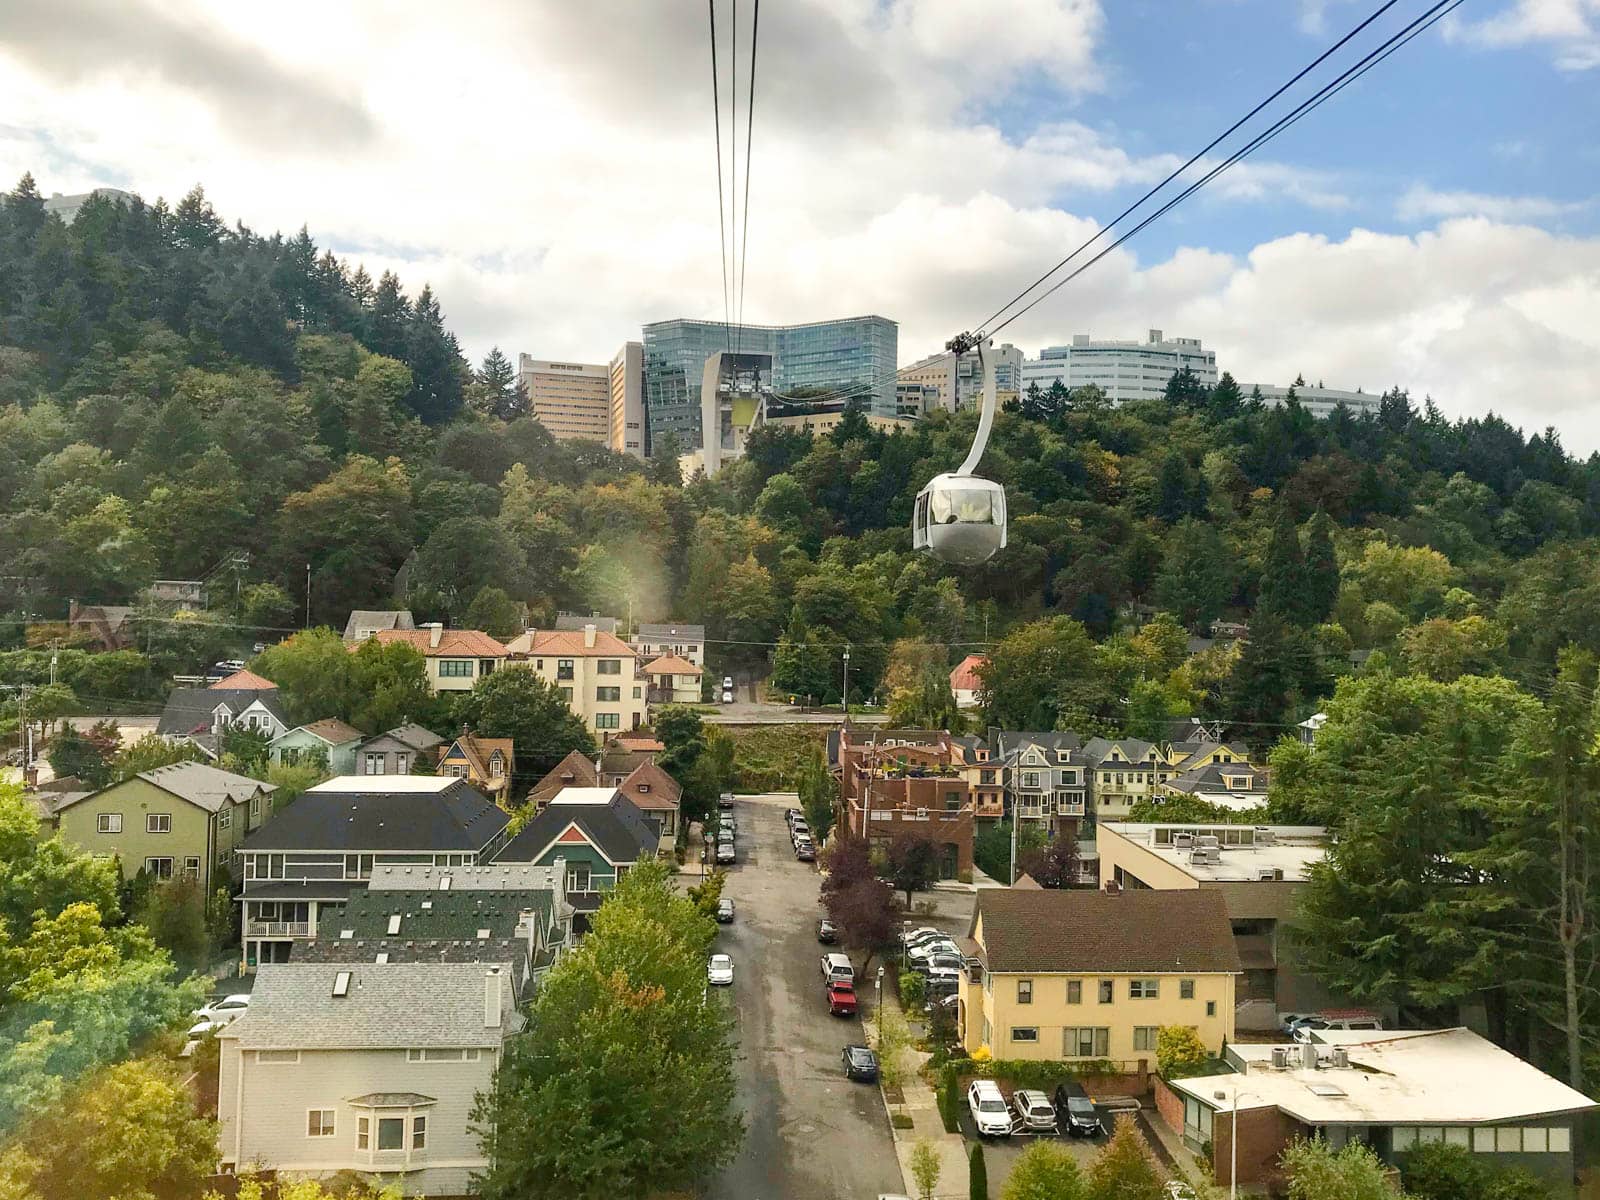 A flew from an aerial tram, where one of the other carriages can be seen. The aerial tram cables are going uphill. Residential houses sit below the tram, and the sky is blue but filled with many clouds. Towards the top of the hill is a lot of vegetation.